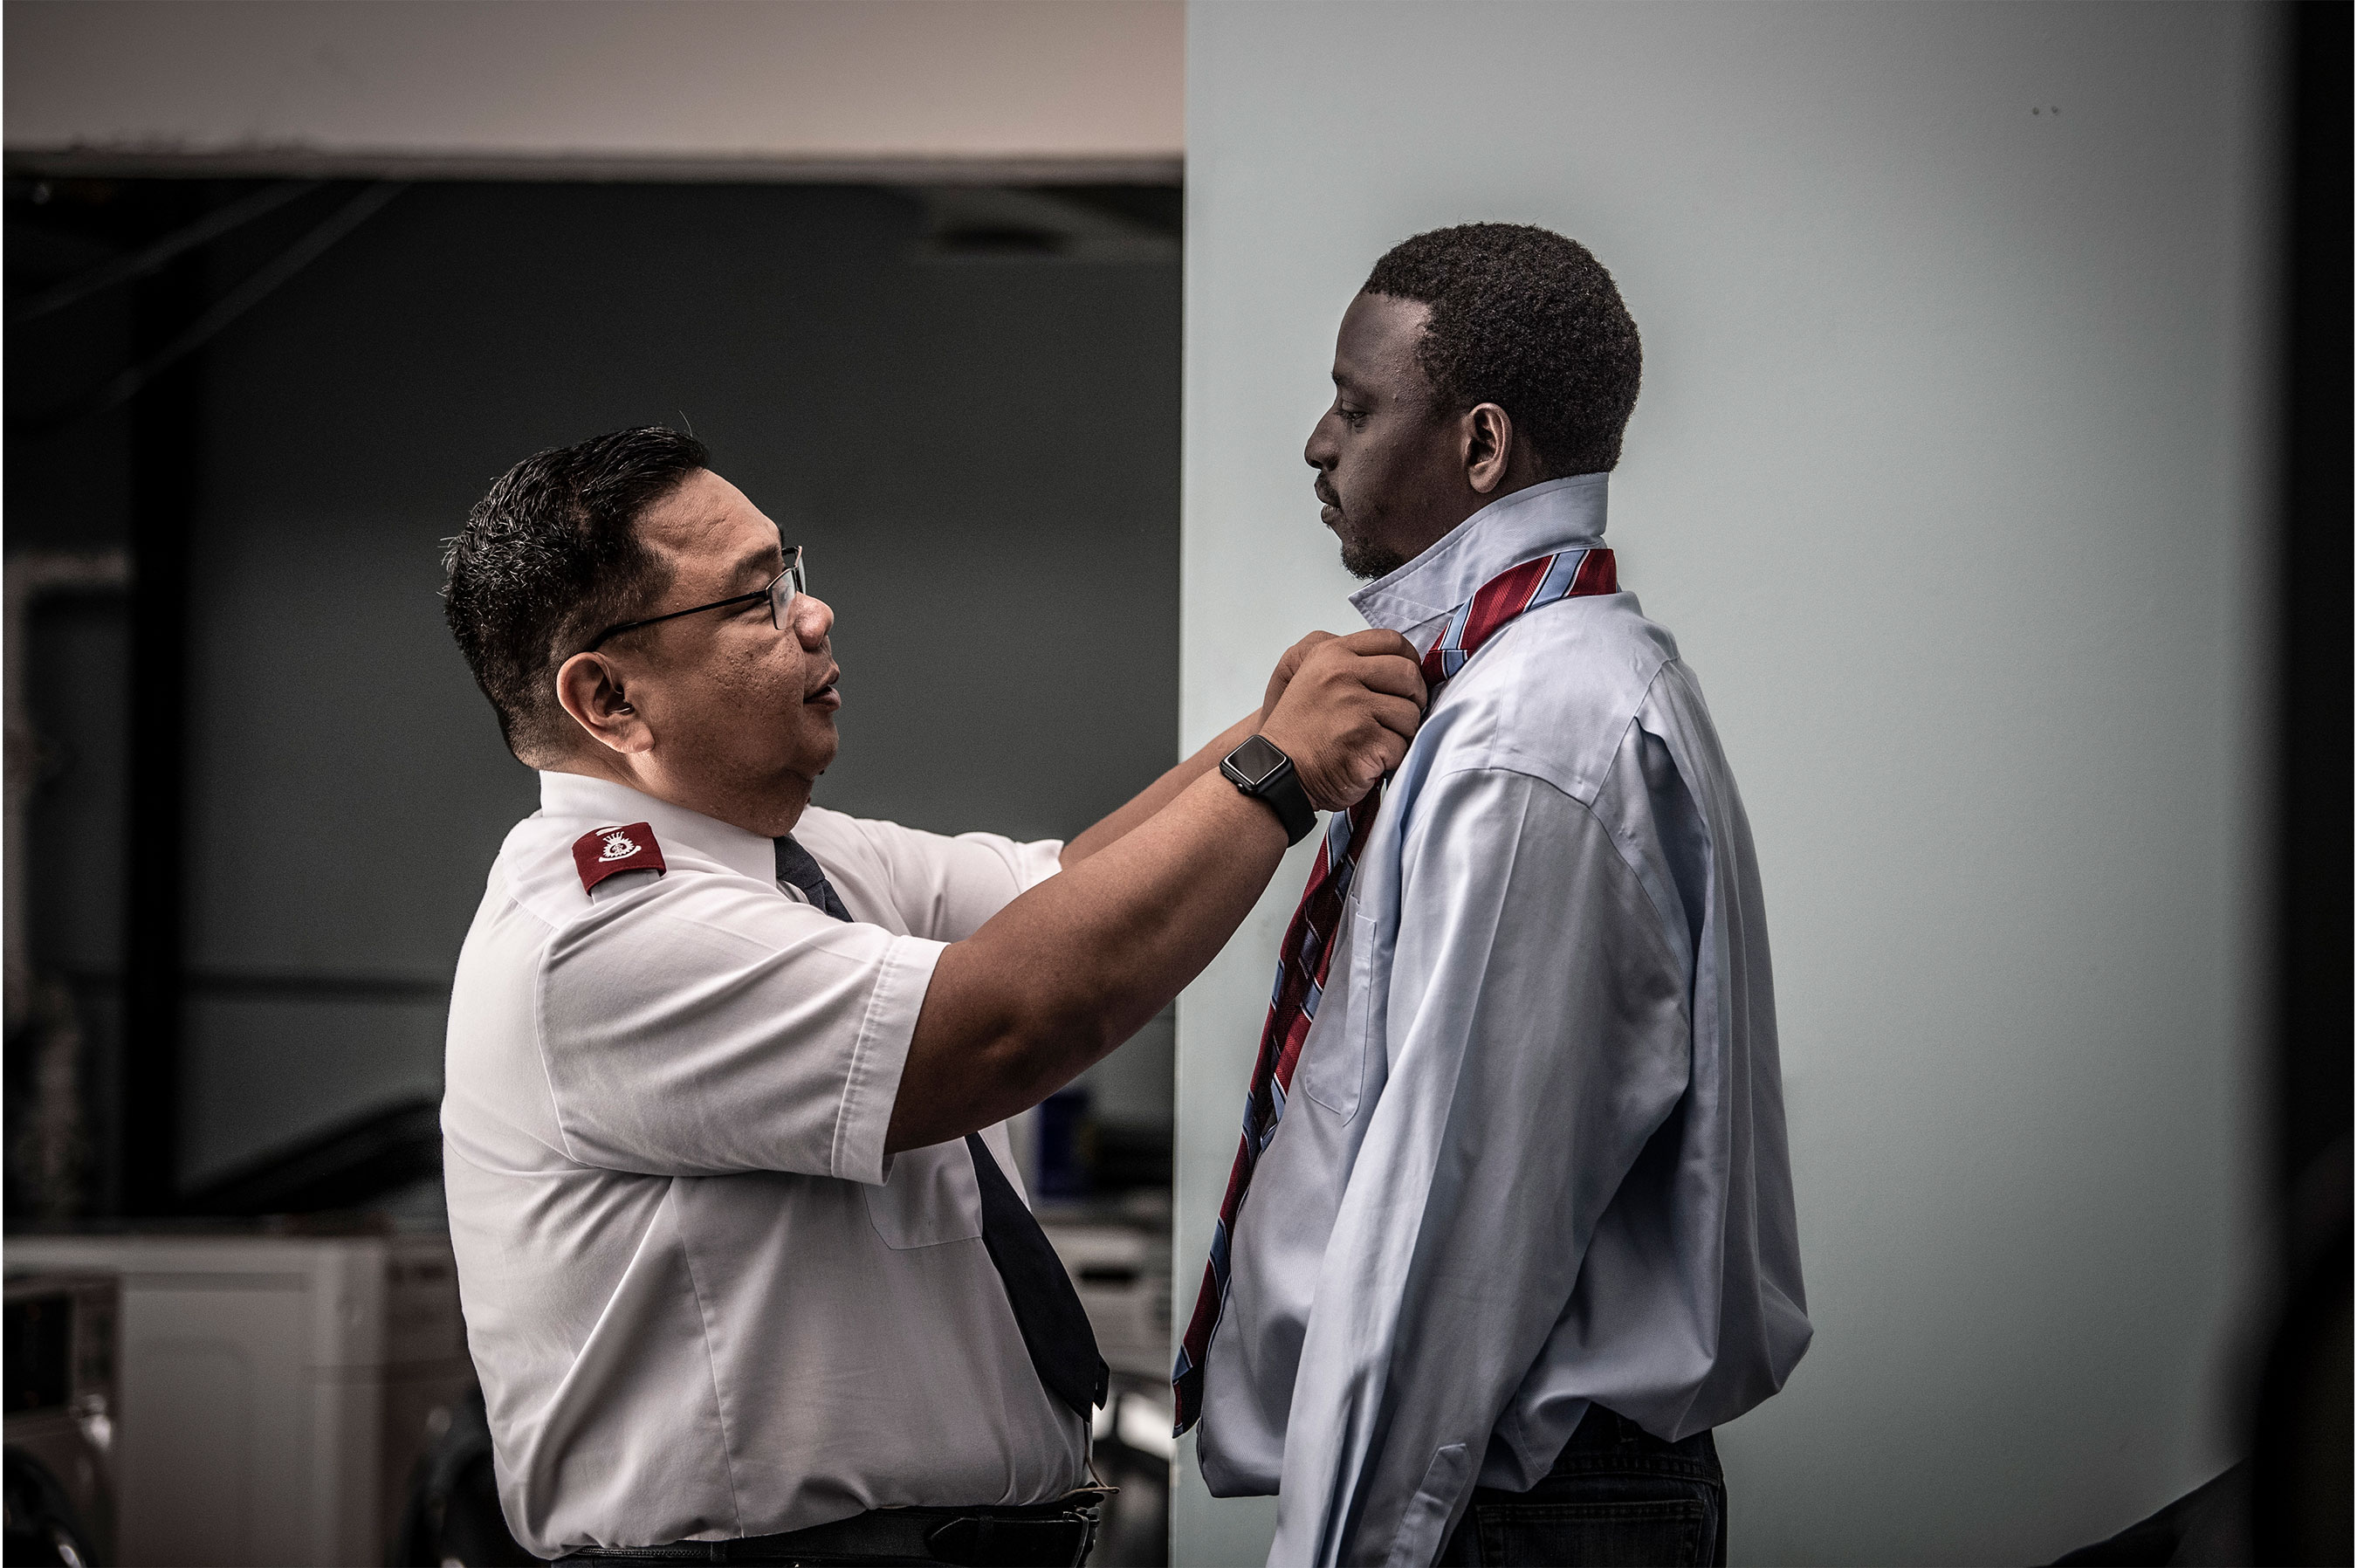 Man helping another man with a tie